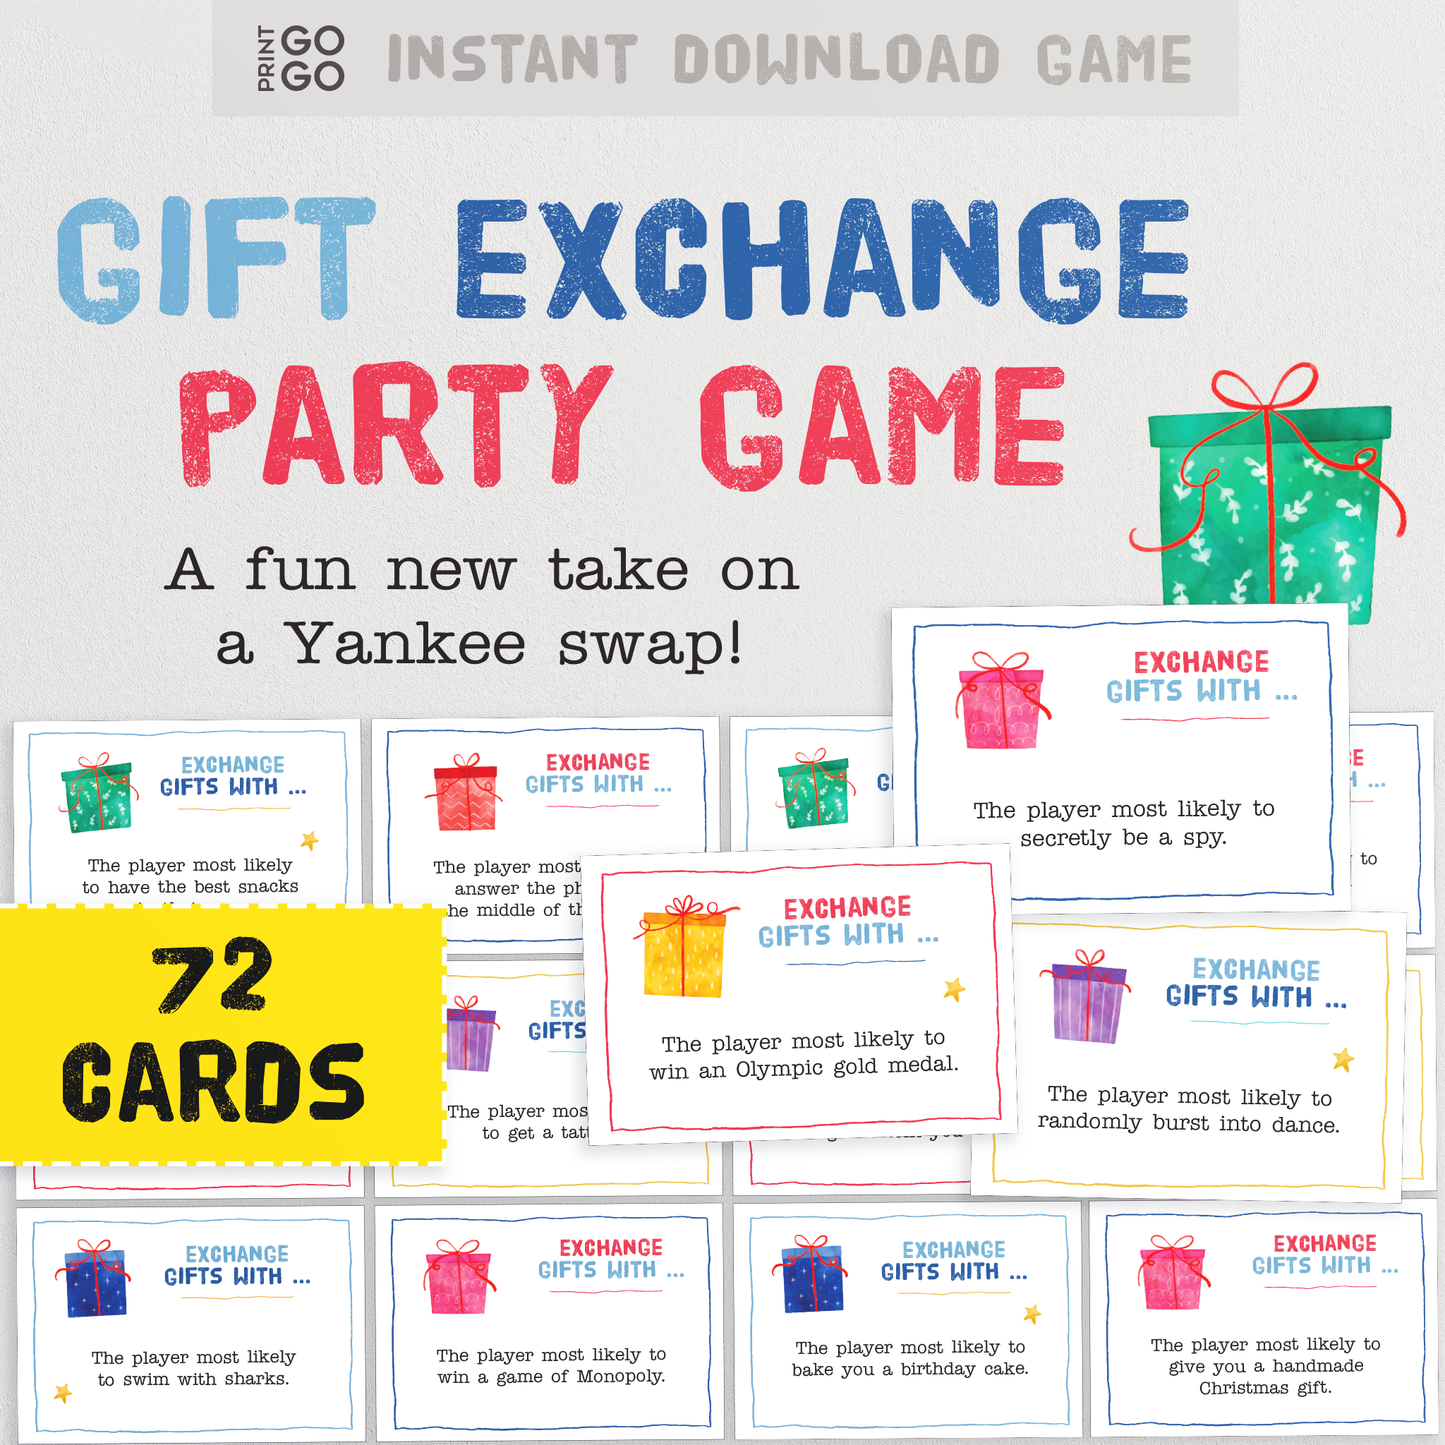 Gift Exchange Party Game - The Hilarious Yankee Swap Gift Game for Groups